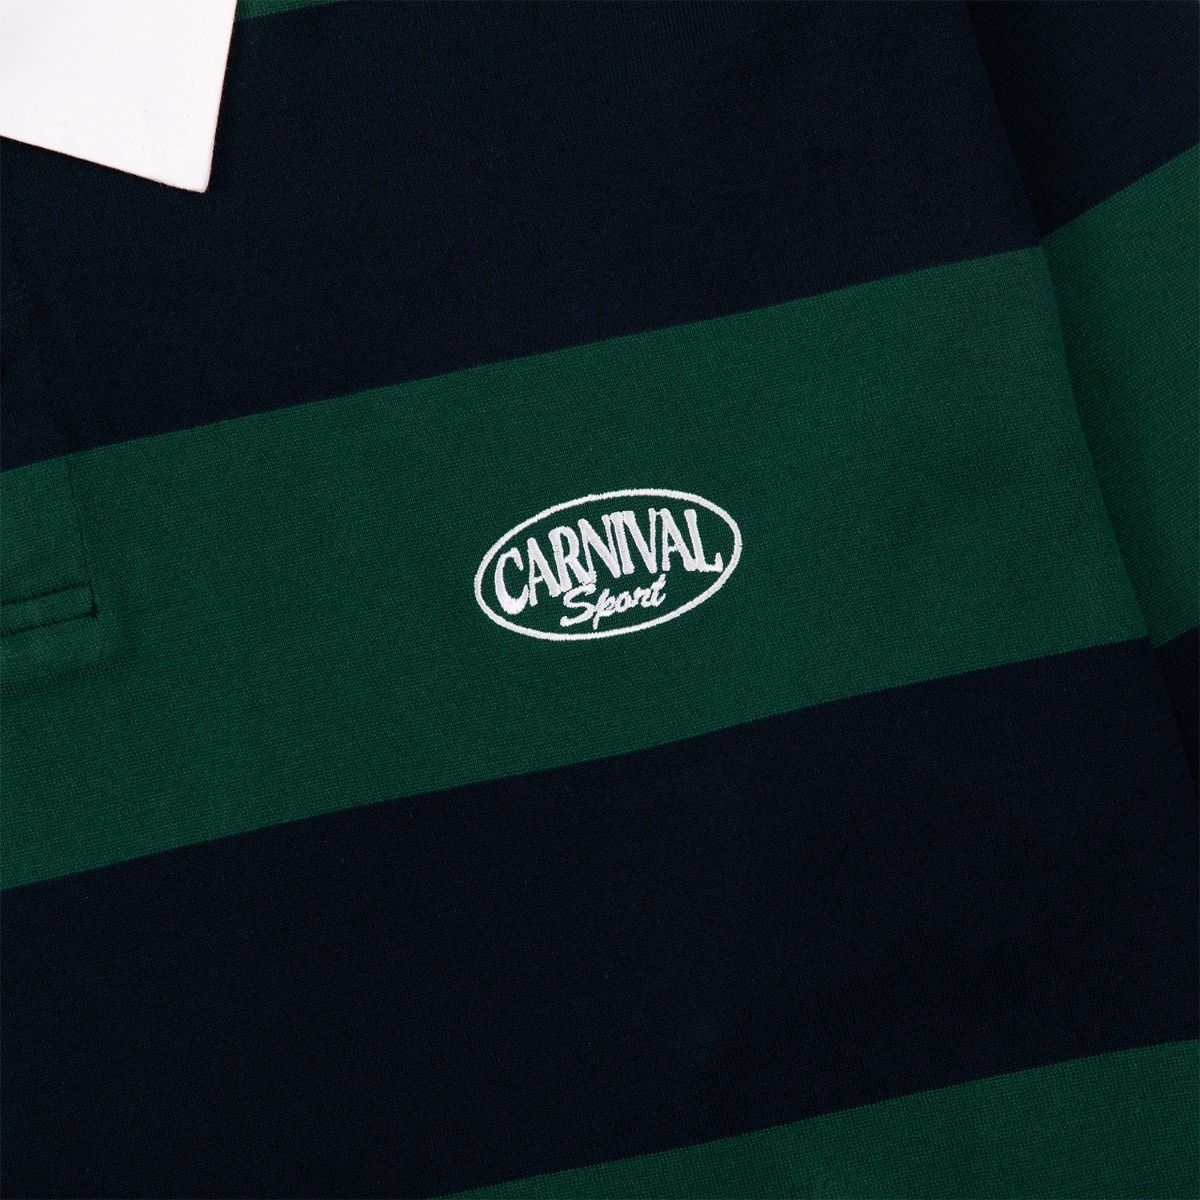 CARNIVAL SS22 RUGBY POLO T-SHIRT GREEN